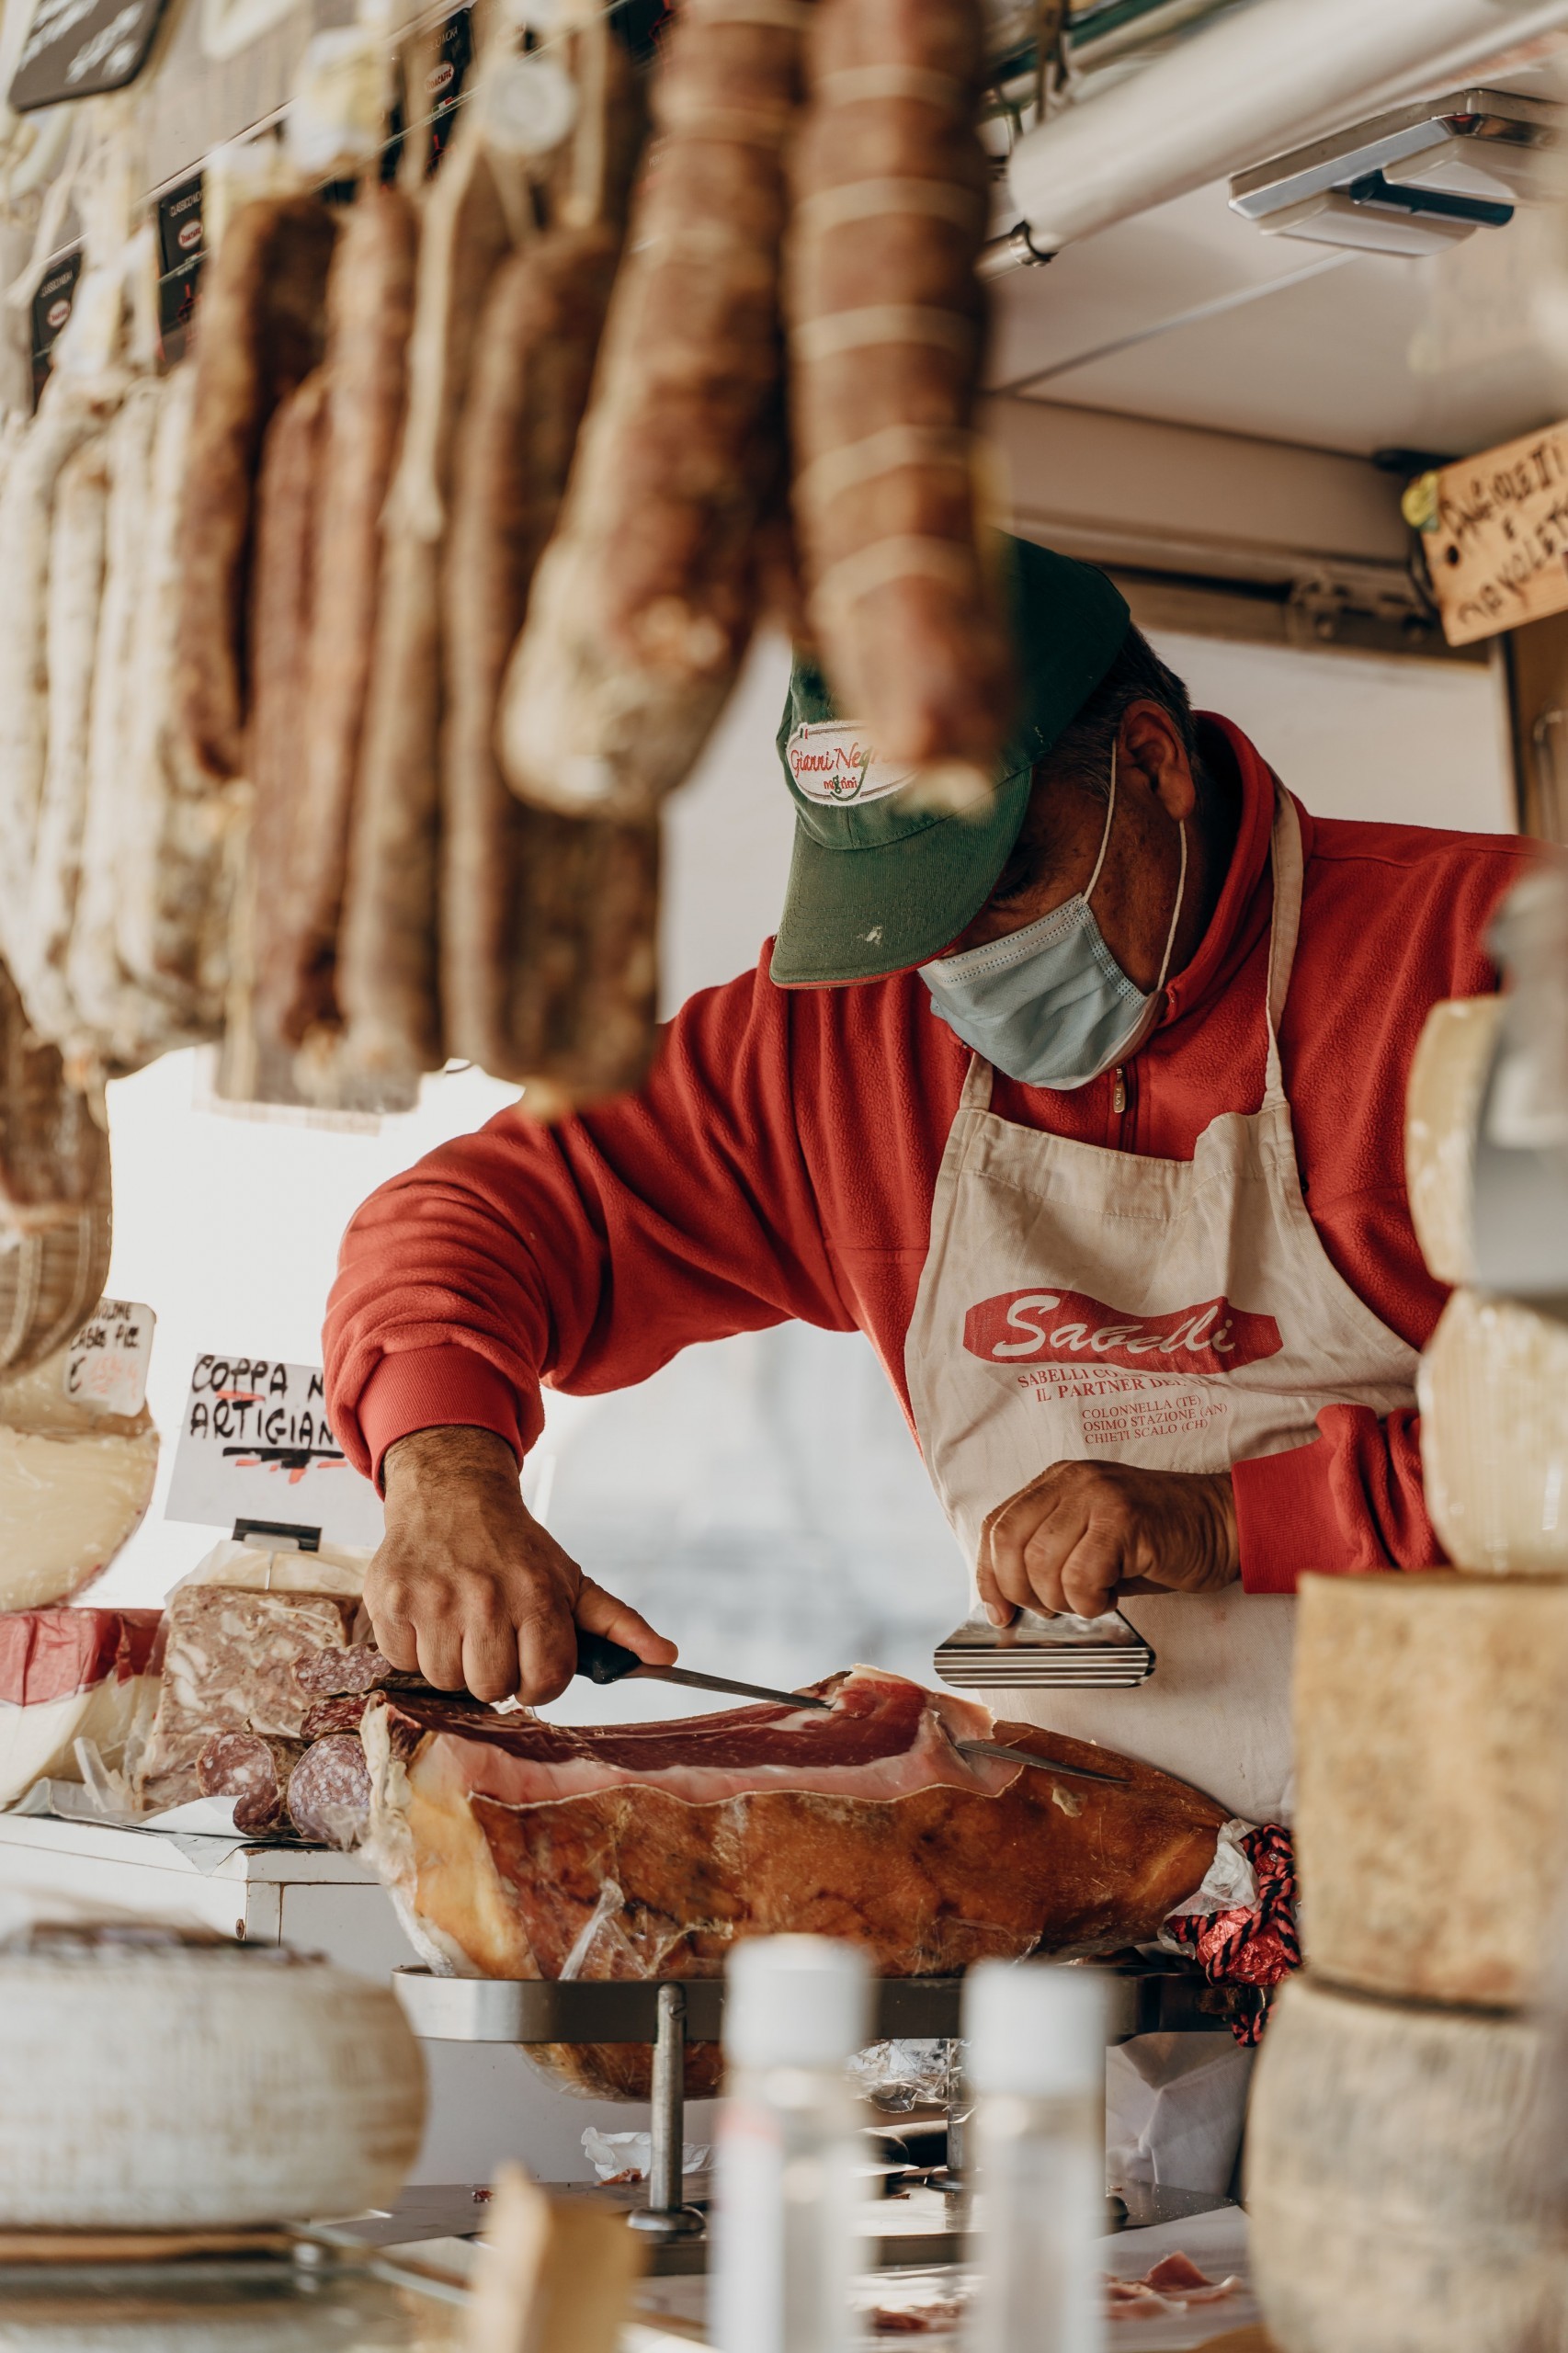 A grocer in Italy cuts a slice from a large block of prosciutto